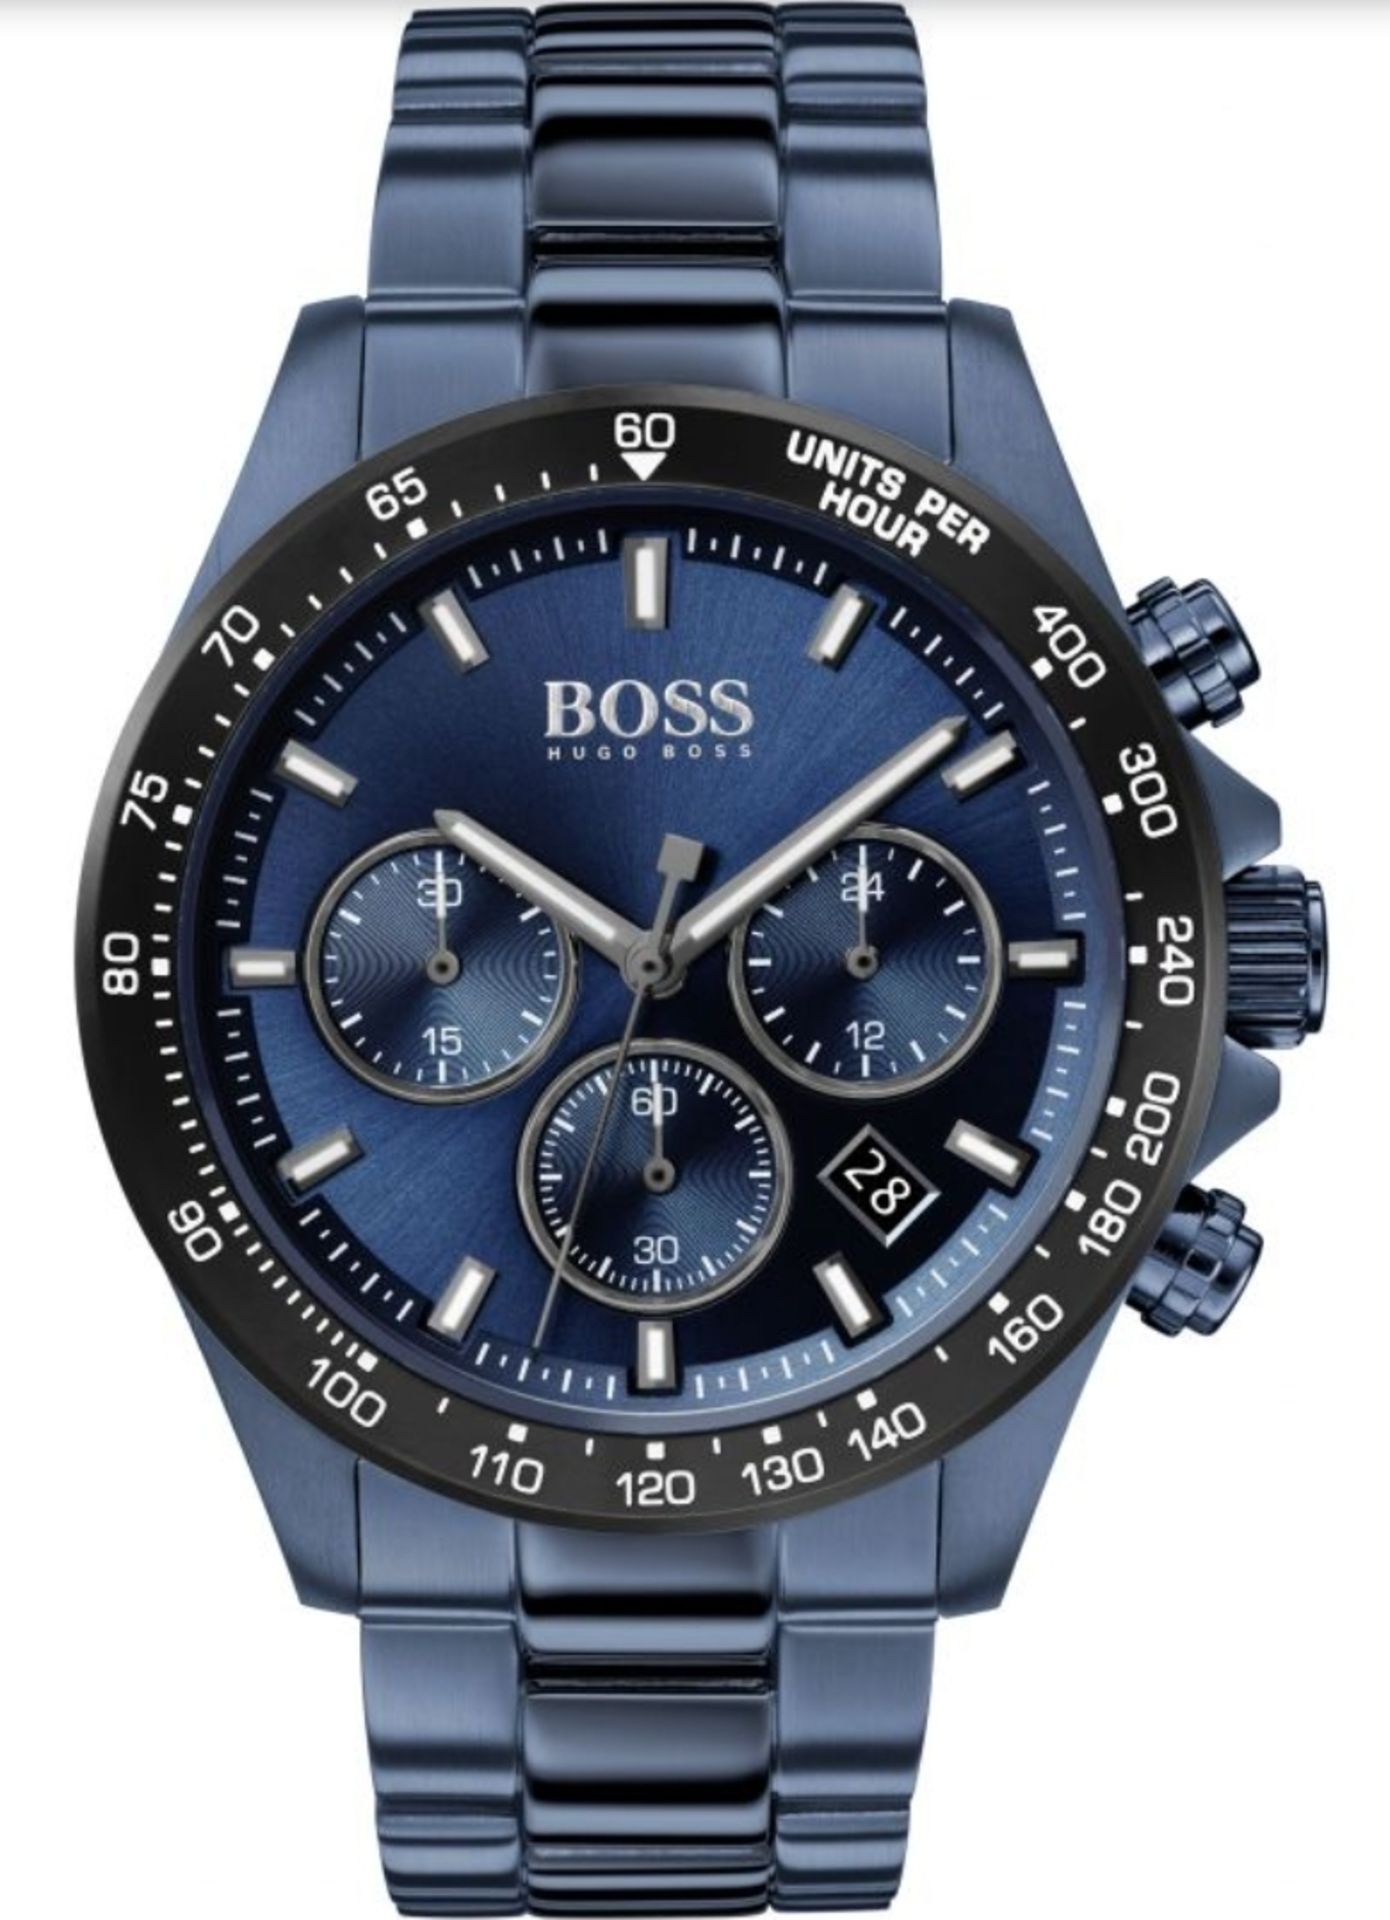 Hugo Boss Trade Lot 1C. A Total Of 20 Brand New Hugo Boss Watches - Image 4 of 20